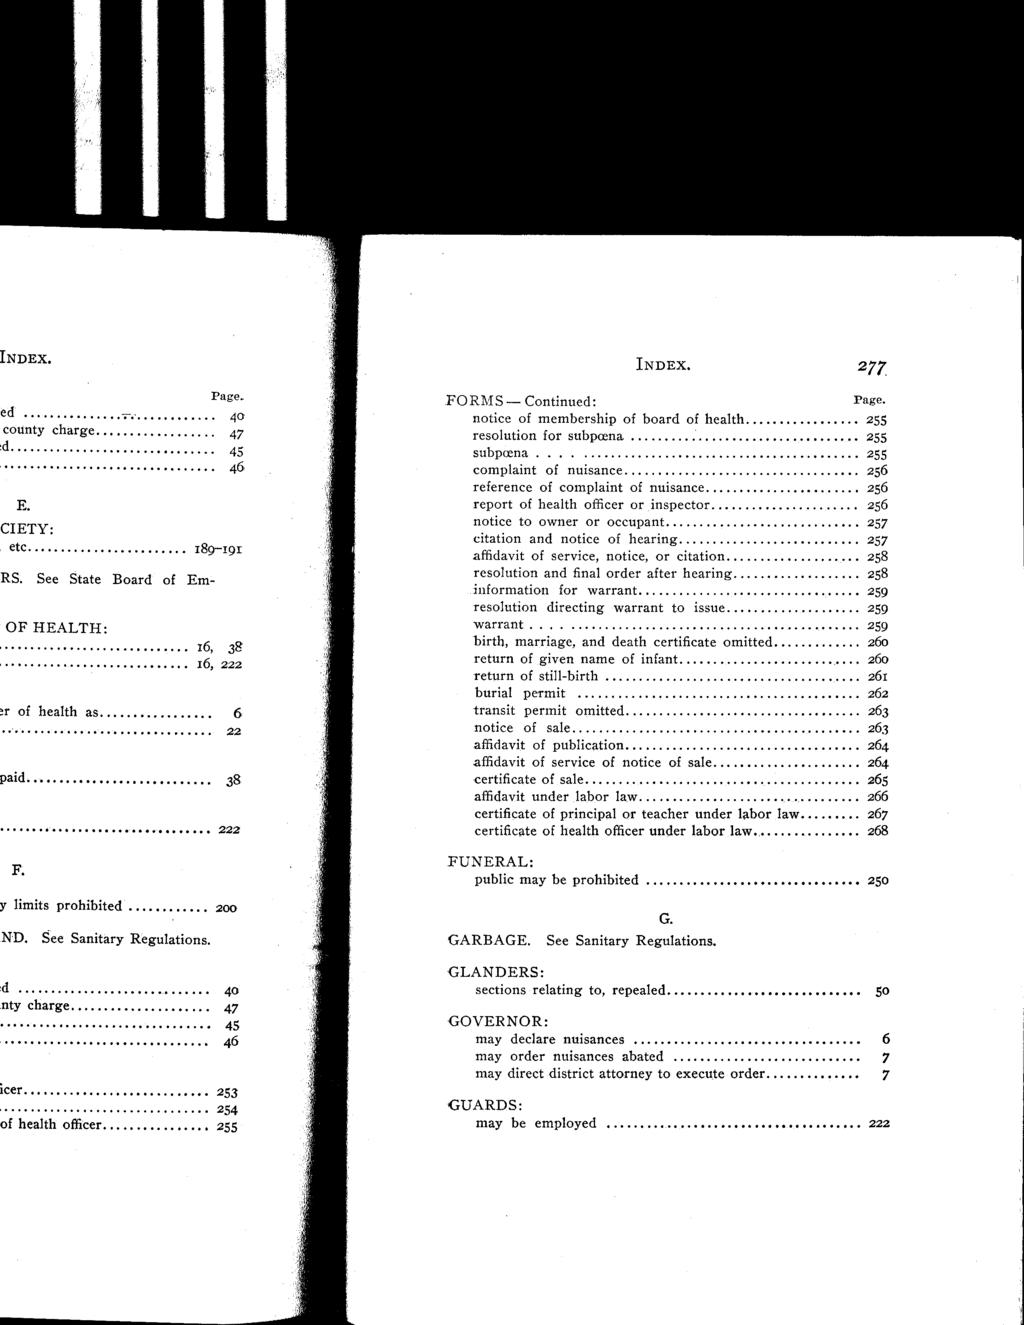 INDEX. 277.FORMS- Continued : Page.